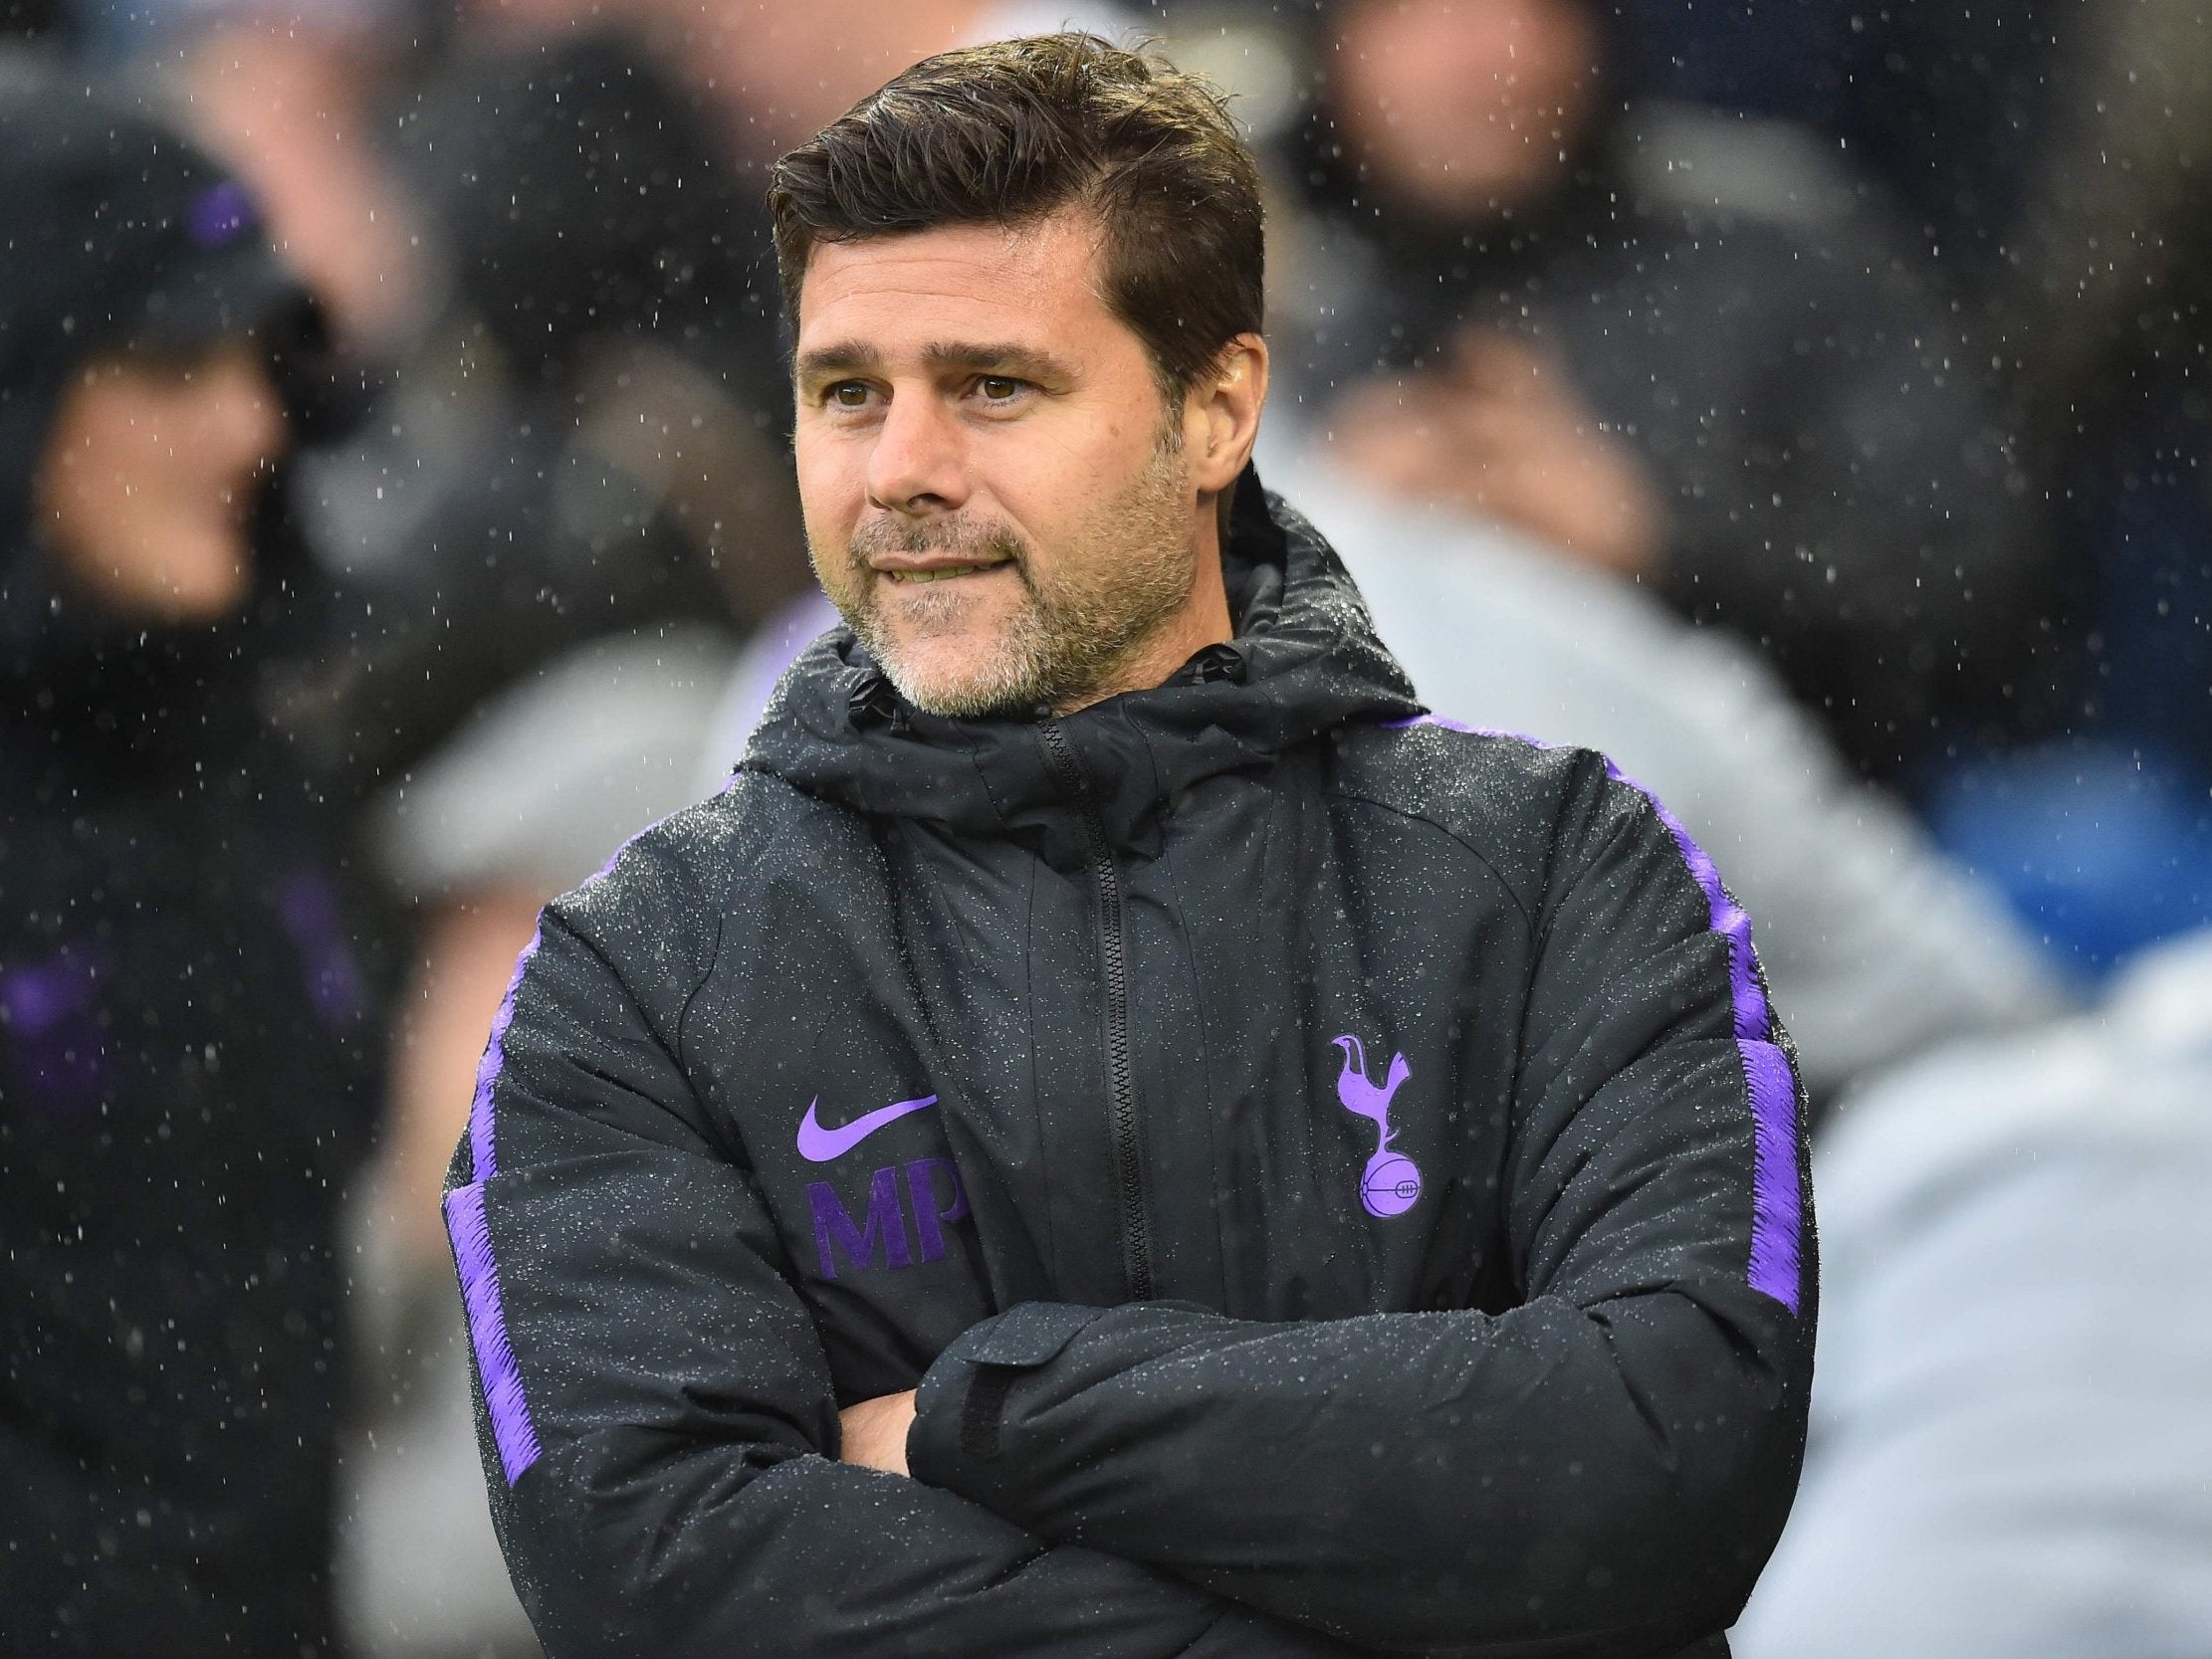 West Ham vs Tottenham: What time does it start, where can I watch it, odds, form guide and more